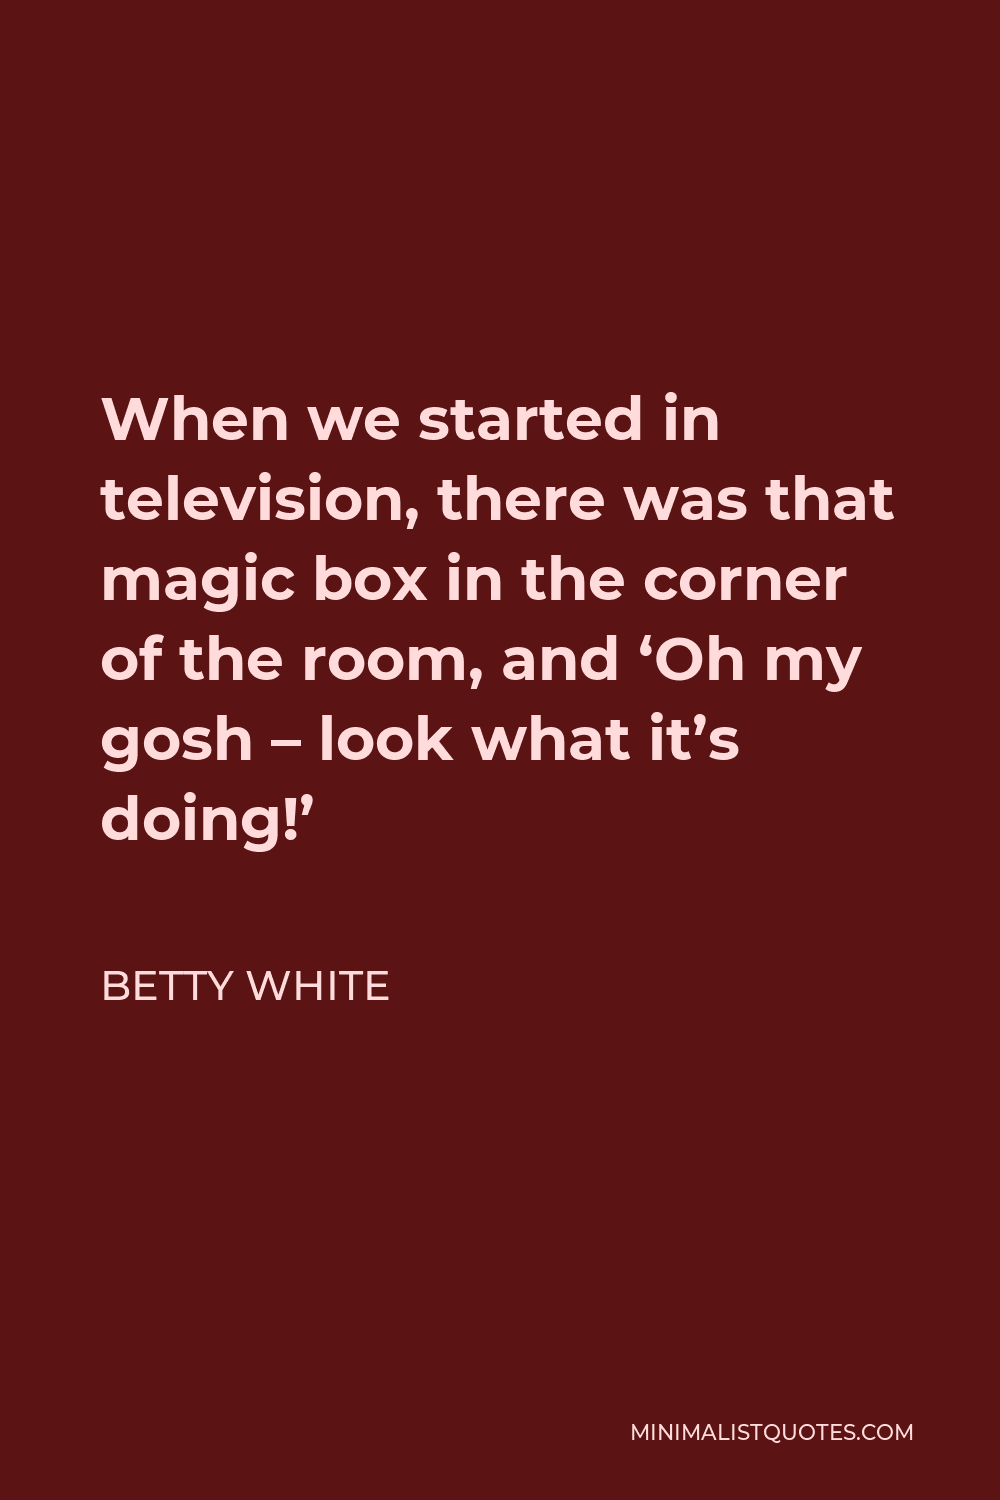 Betty White Quote - When we started in television, there was that magic box in the corner of the room, and ‘Oh my gosh – look what it’s doing!’